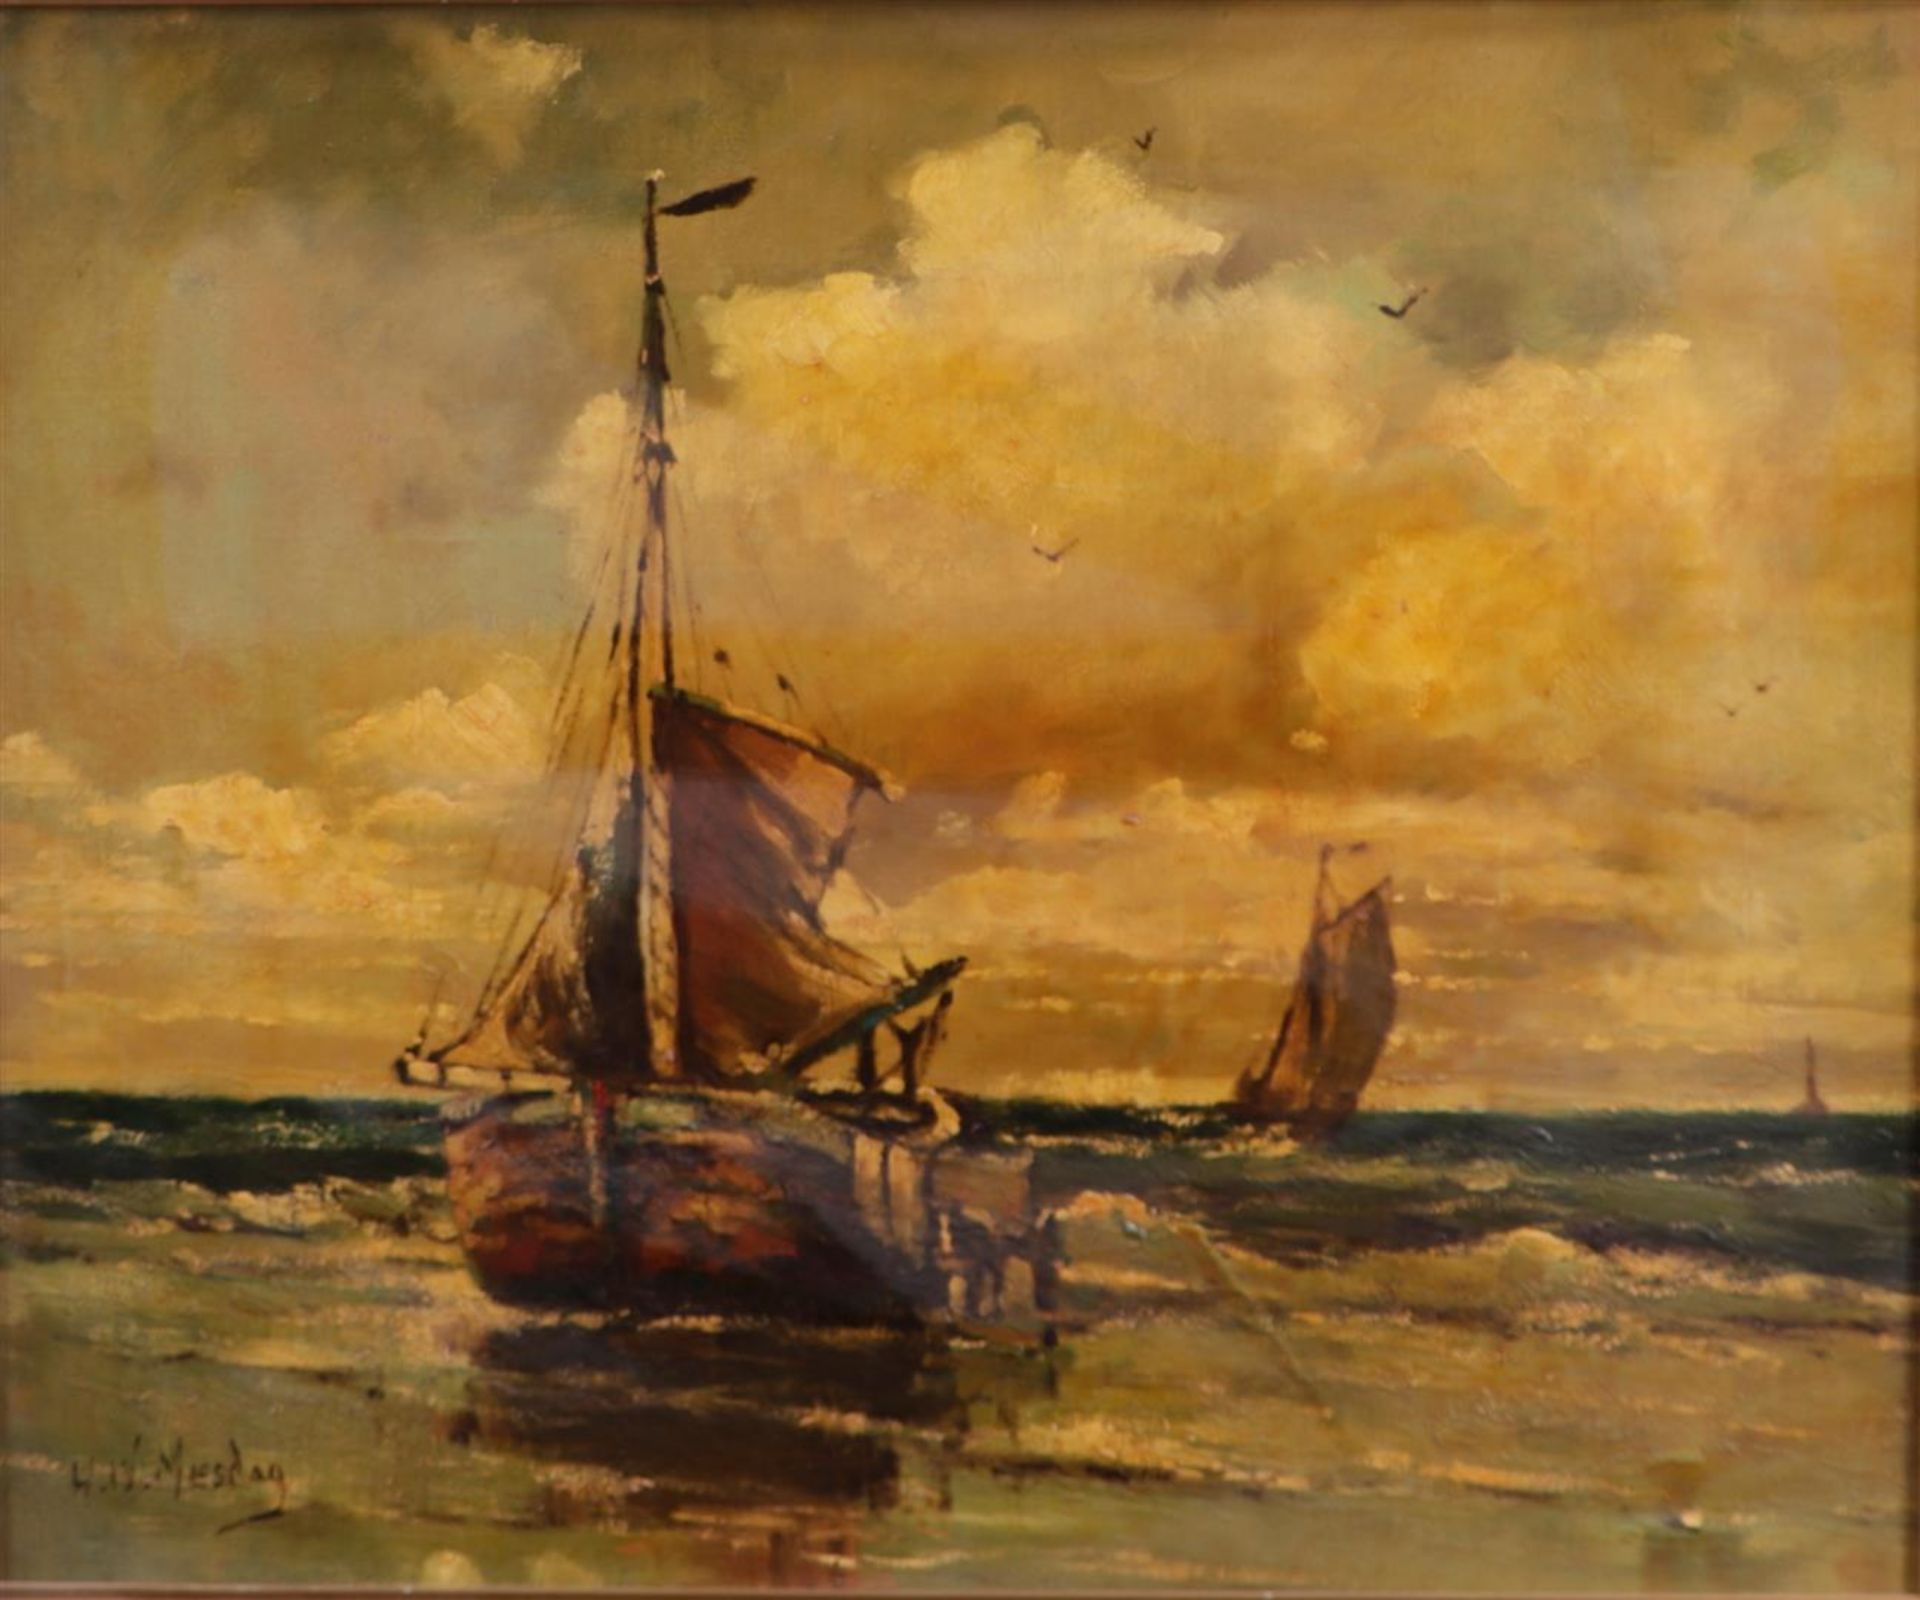 Dutch School, 20th century, signed H.W. Mesdag, Bomb barges in the surf, oil on panel,
50 x 55 cm.